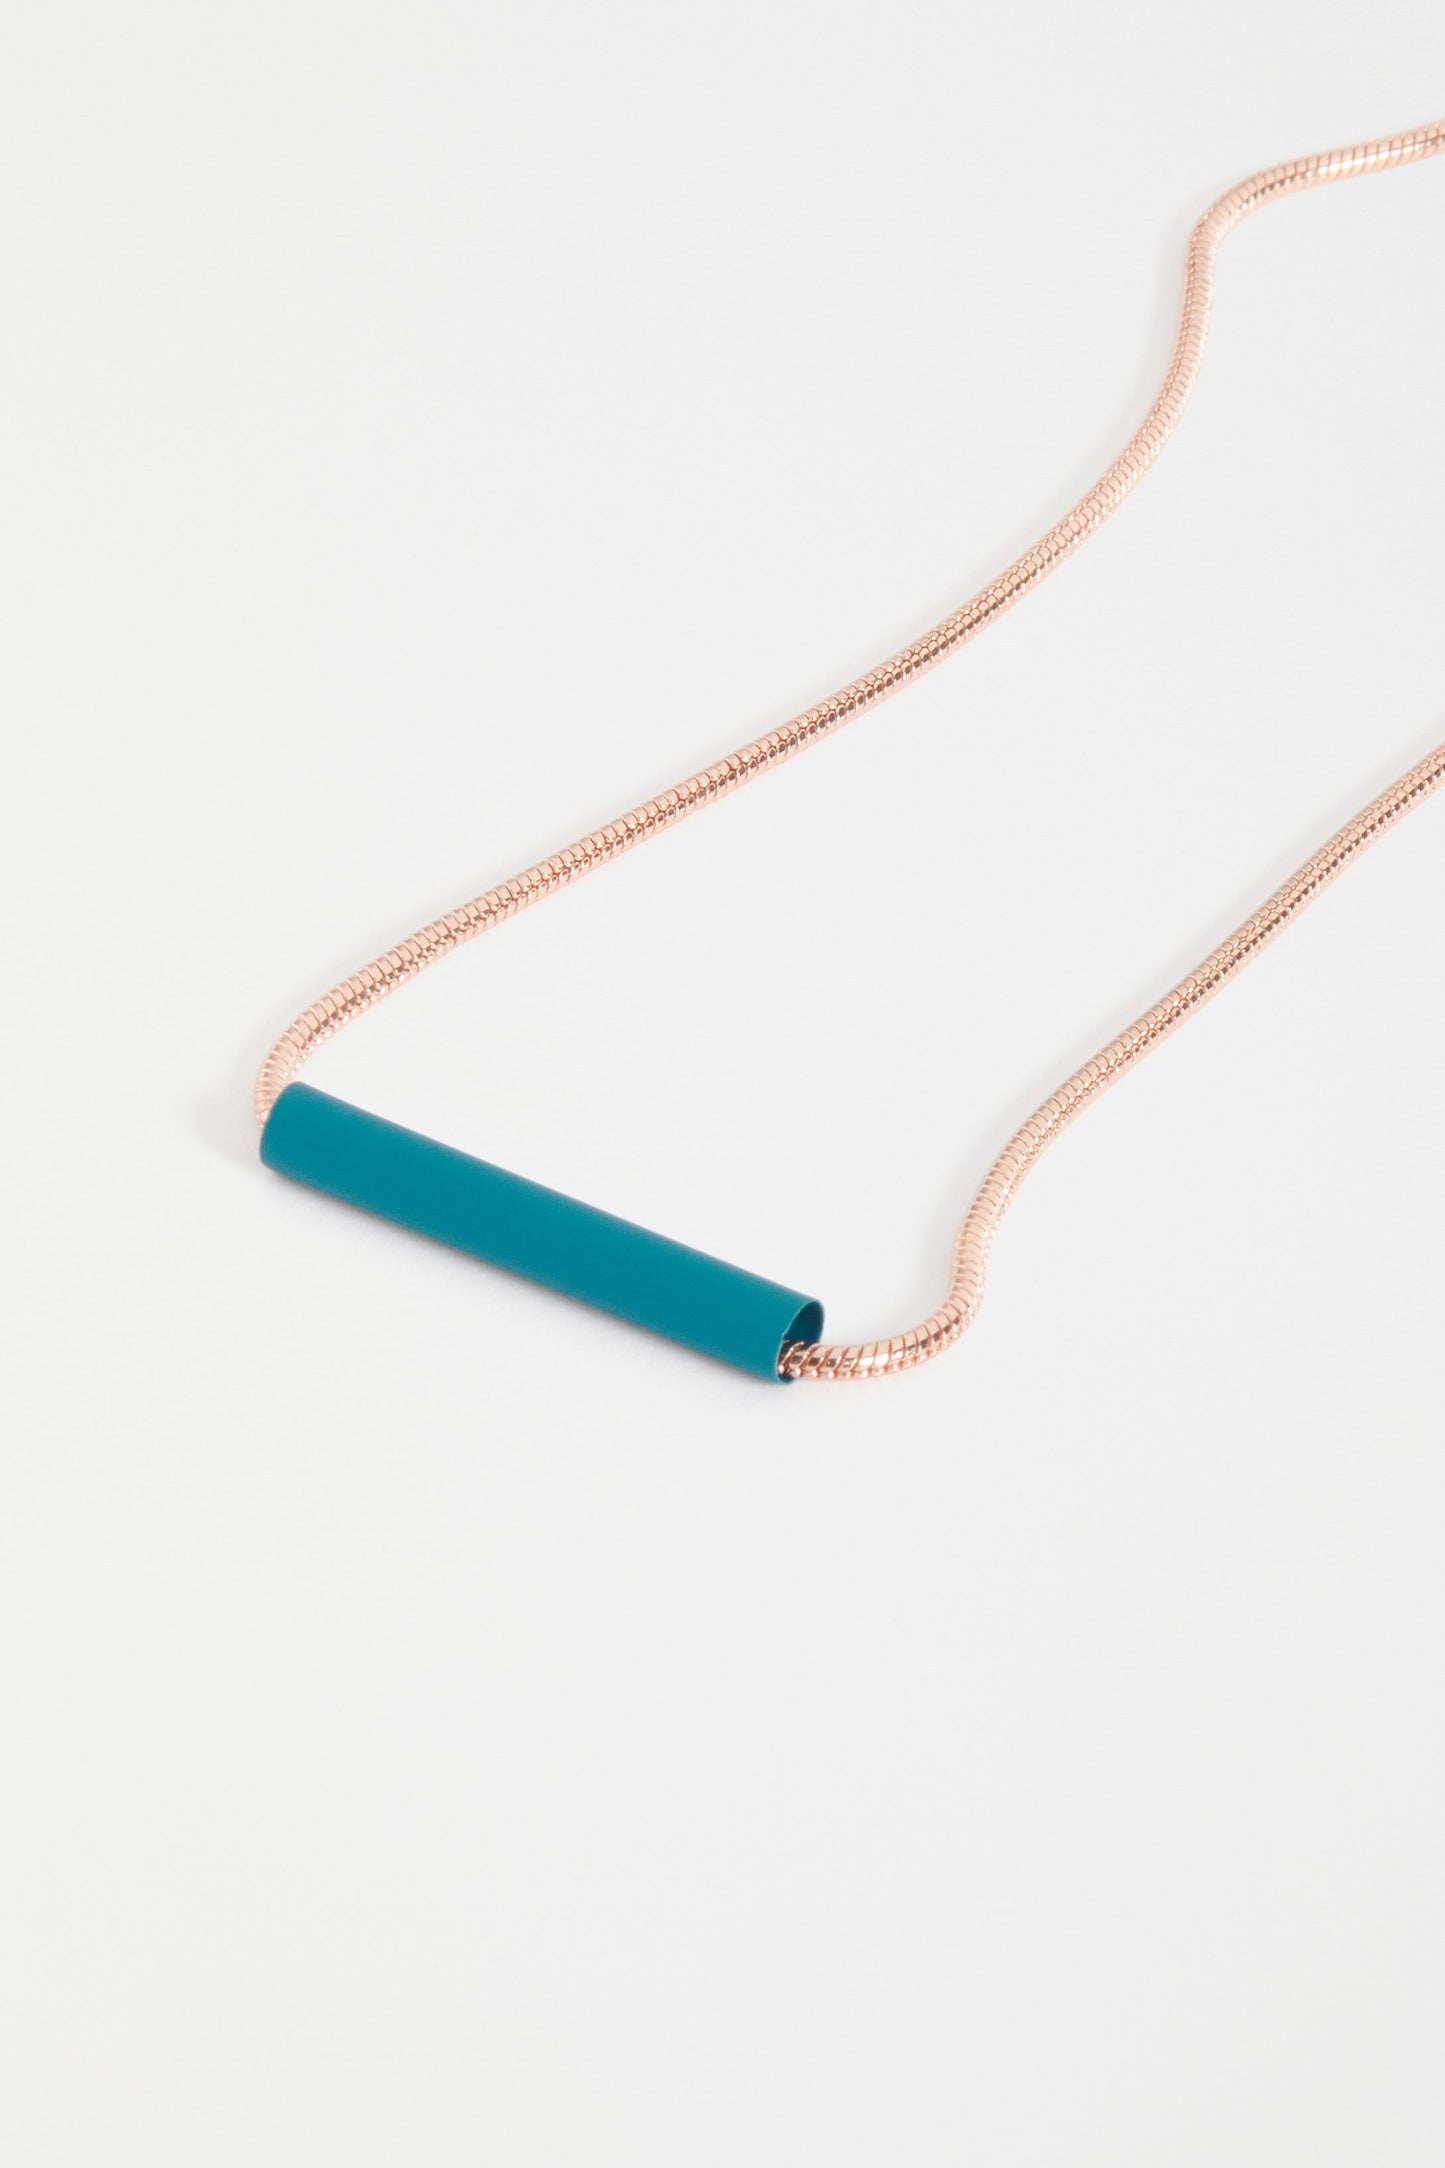 Andi Simple Chain and Bead Short Necklace detail  | TEAL